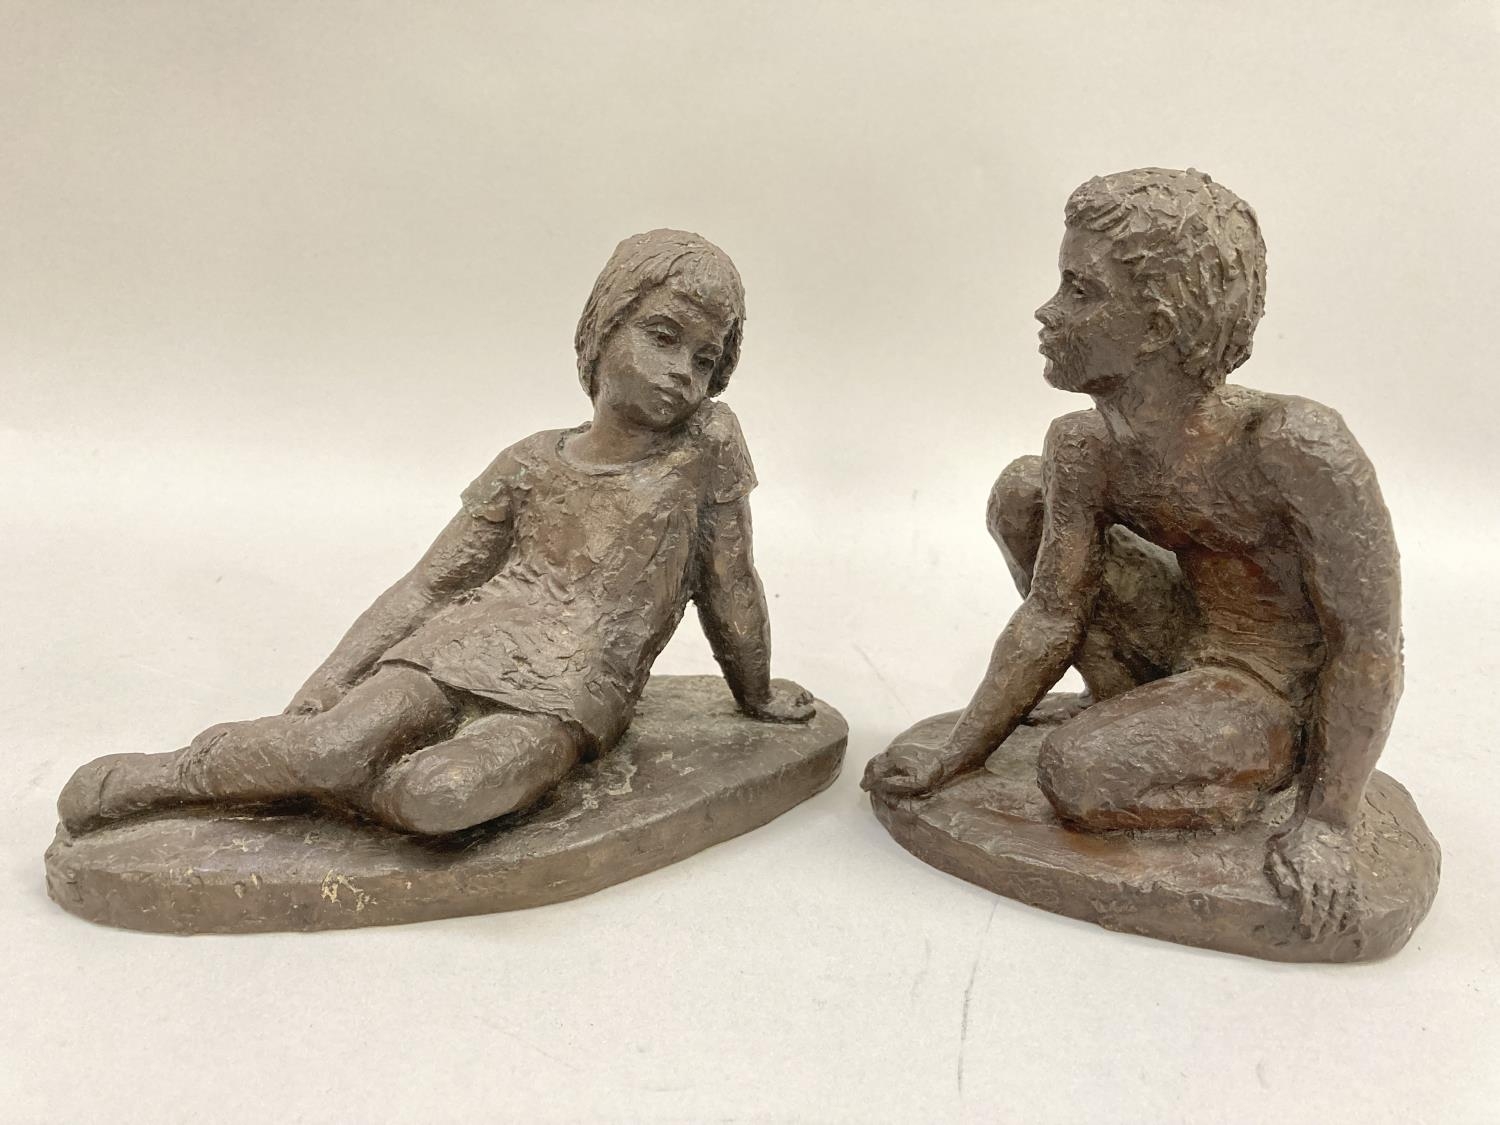 Two bronze effect resin figures of a young girl reclining and a young boy crouched on one knee, 15cm